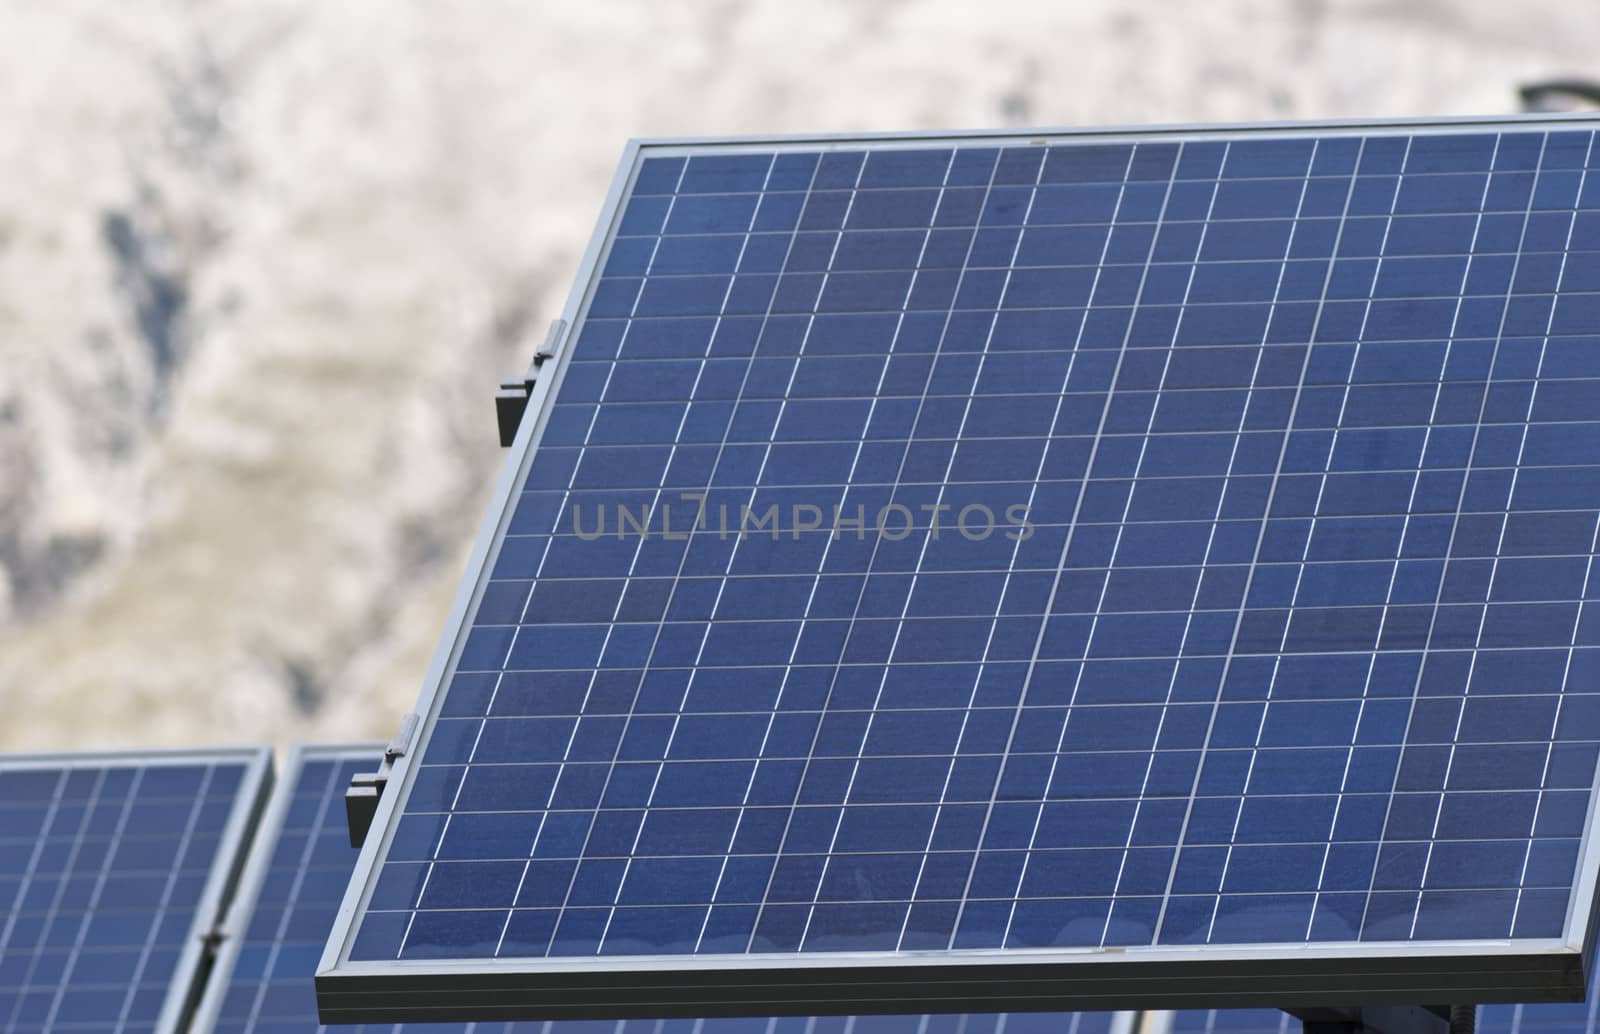 Detail  of solar panels in the Madonie mountains. Sicily